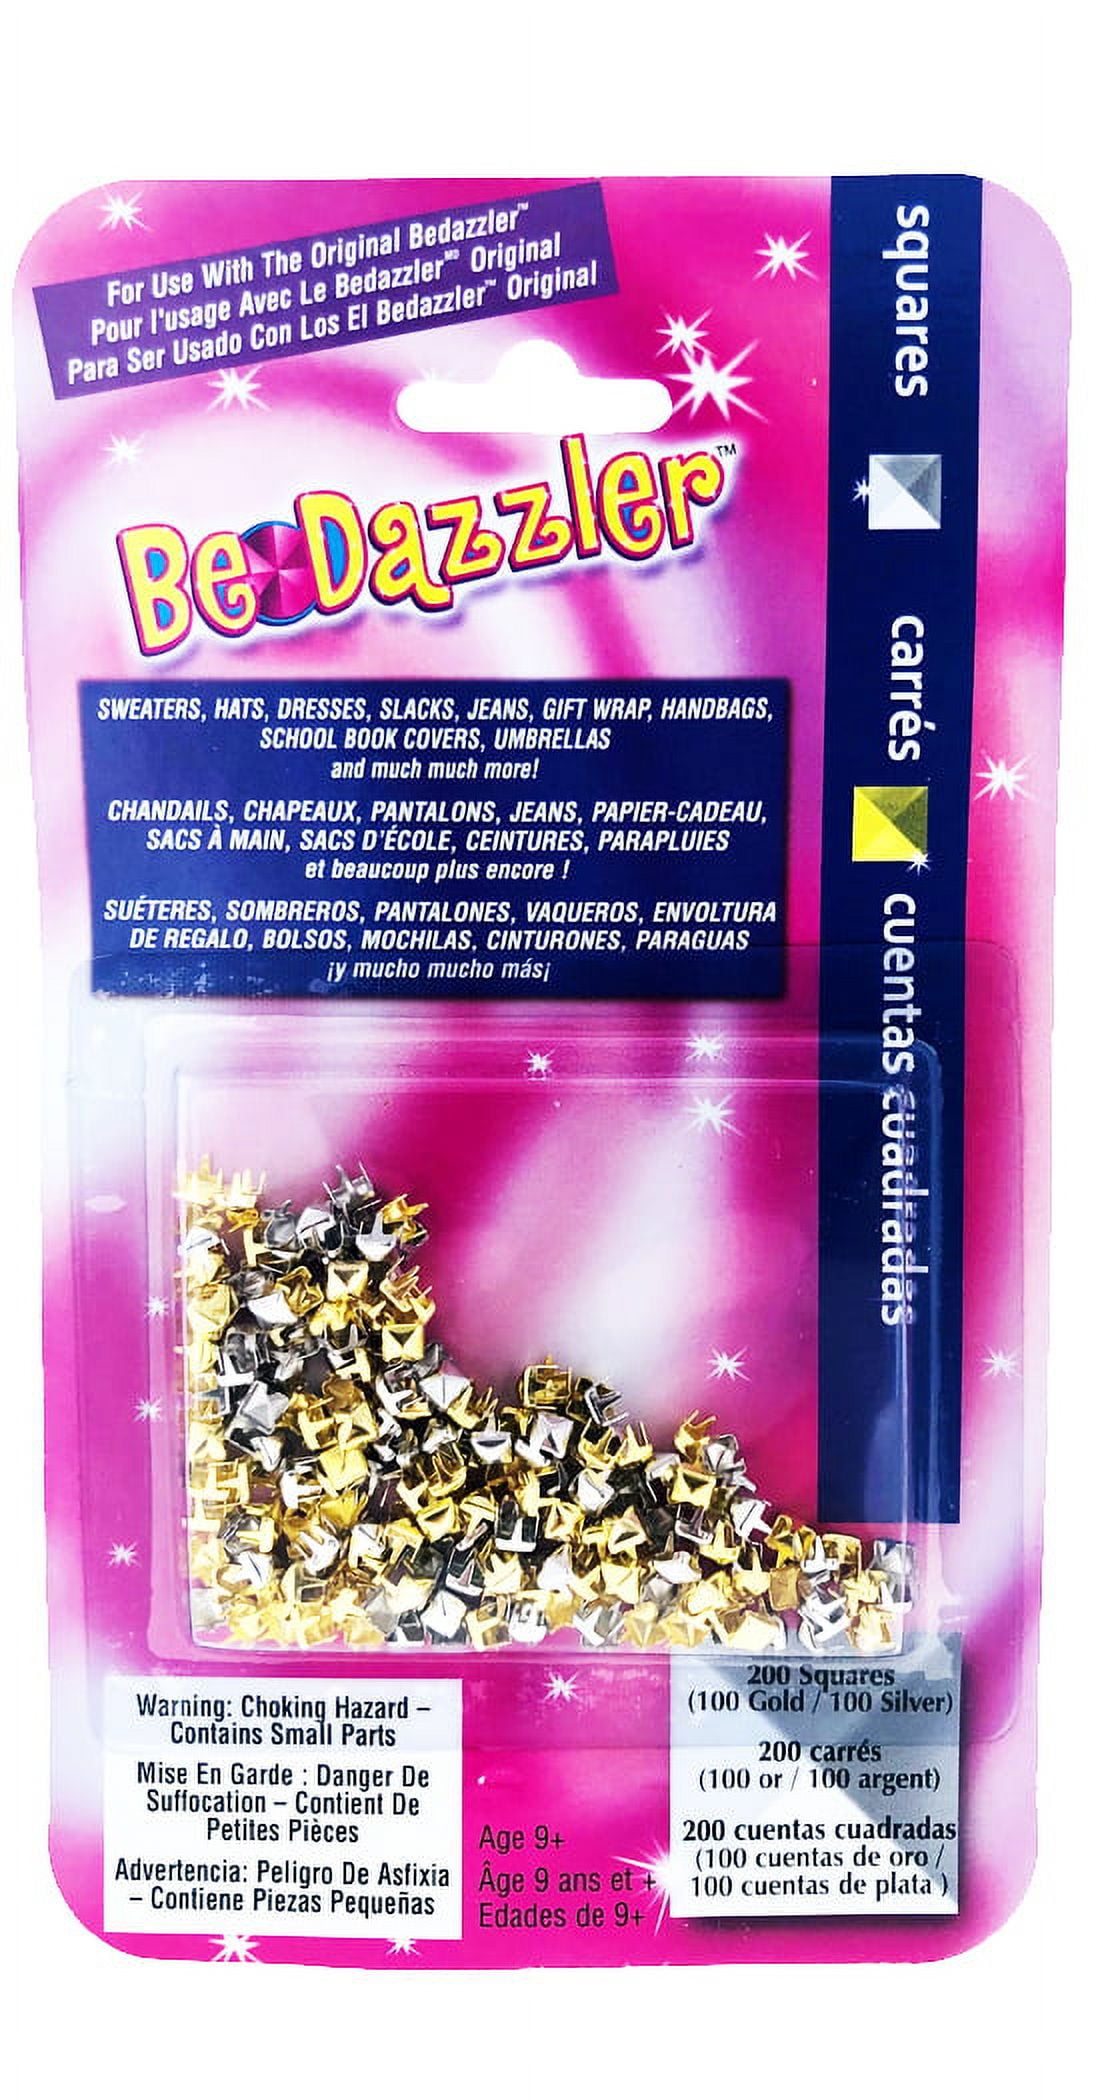 Brand new in box Bedazzler for $1.25. My world just got a lot better. :  r/ThriftStoreHauls